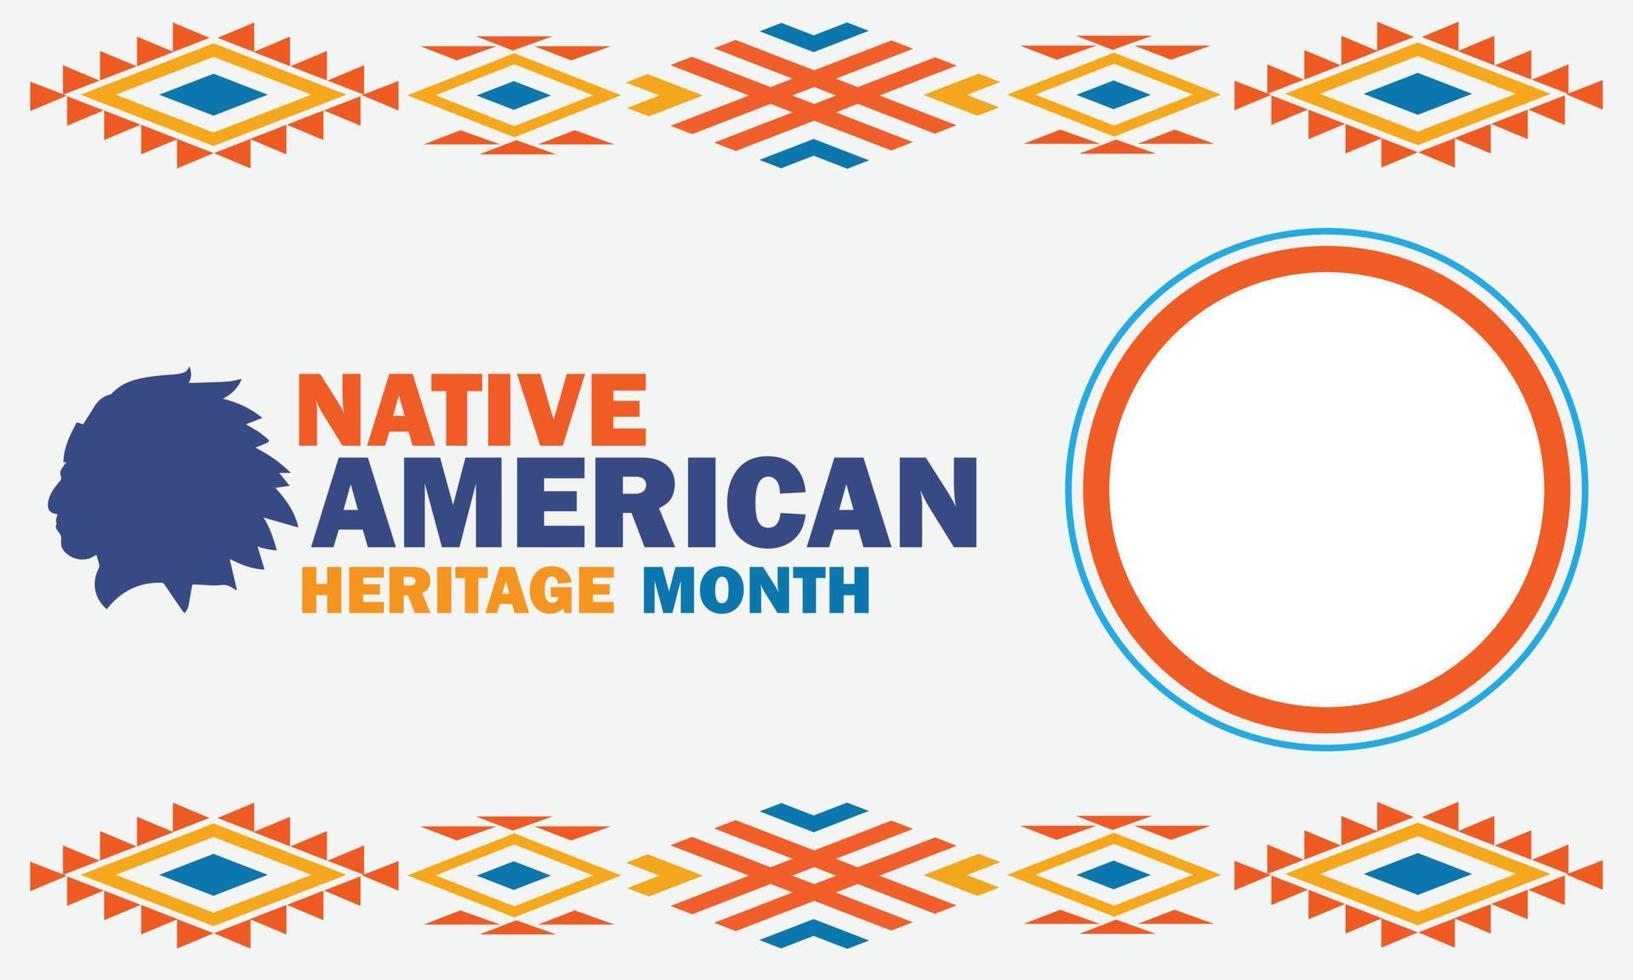 twibbon First Day Native American Heritage Month twibbon, first day twibbon Native American Heritage Month background twibbon vector